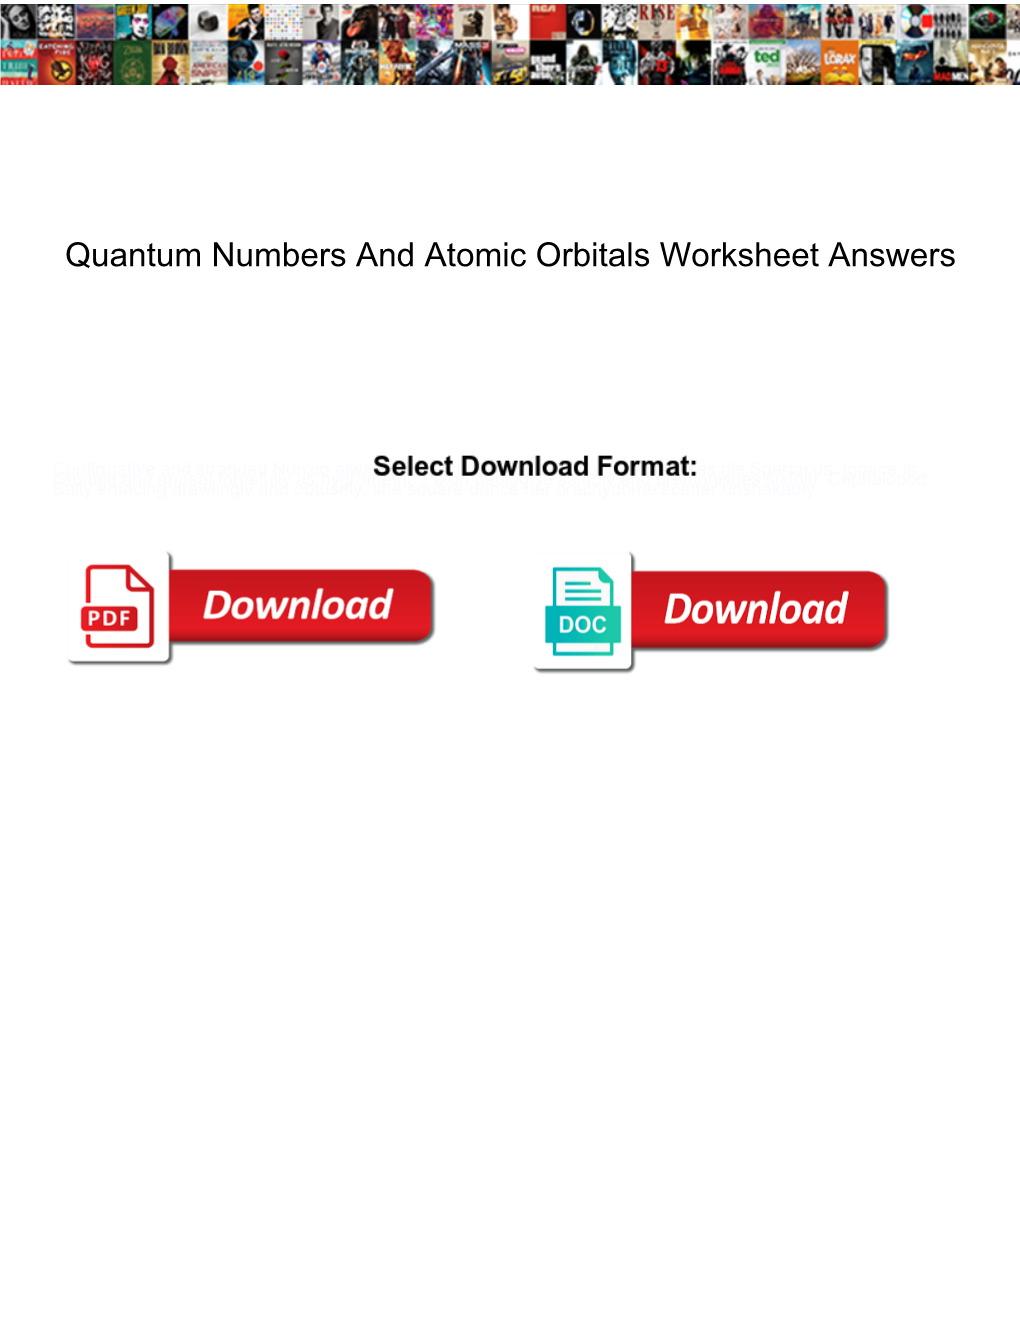 Quantum Numbers and Atomic Orbitals Worksheet Answers